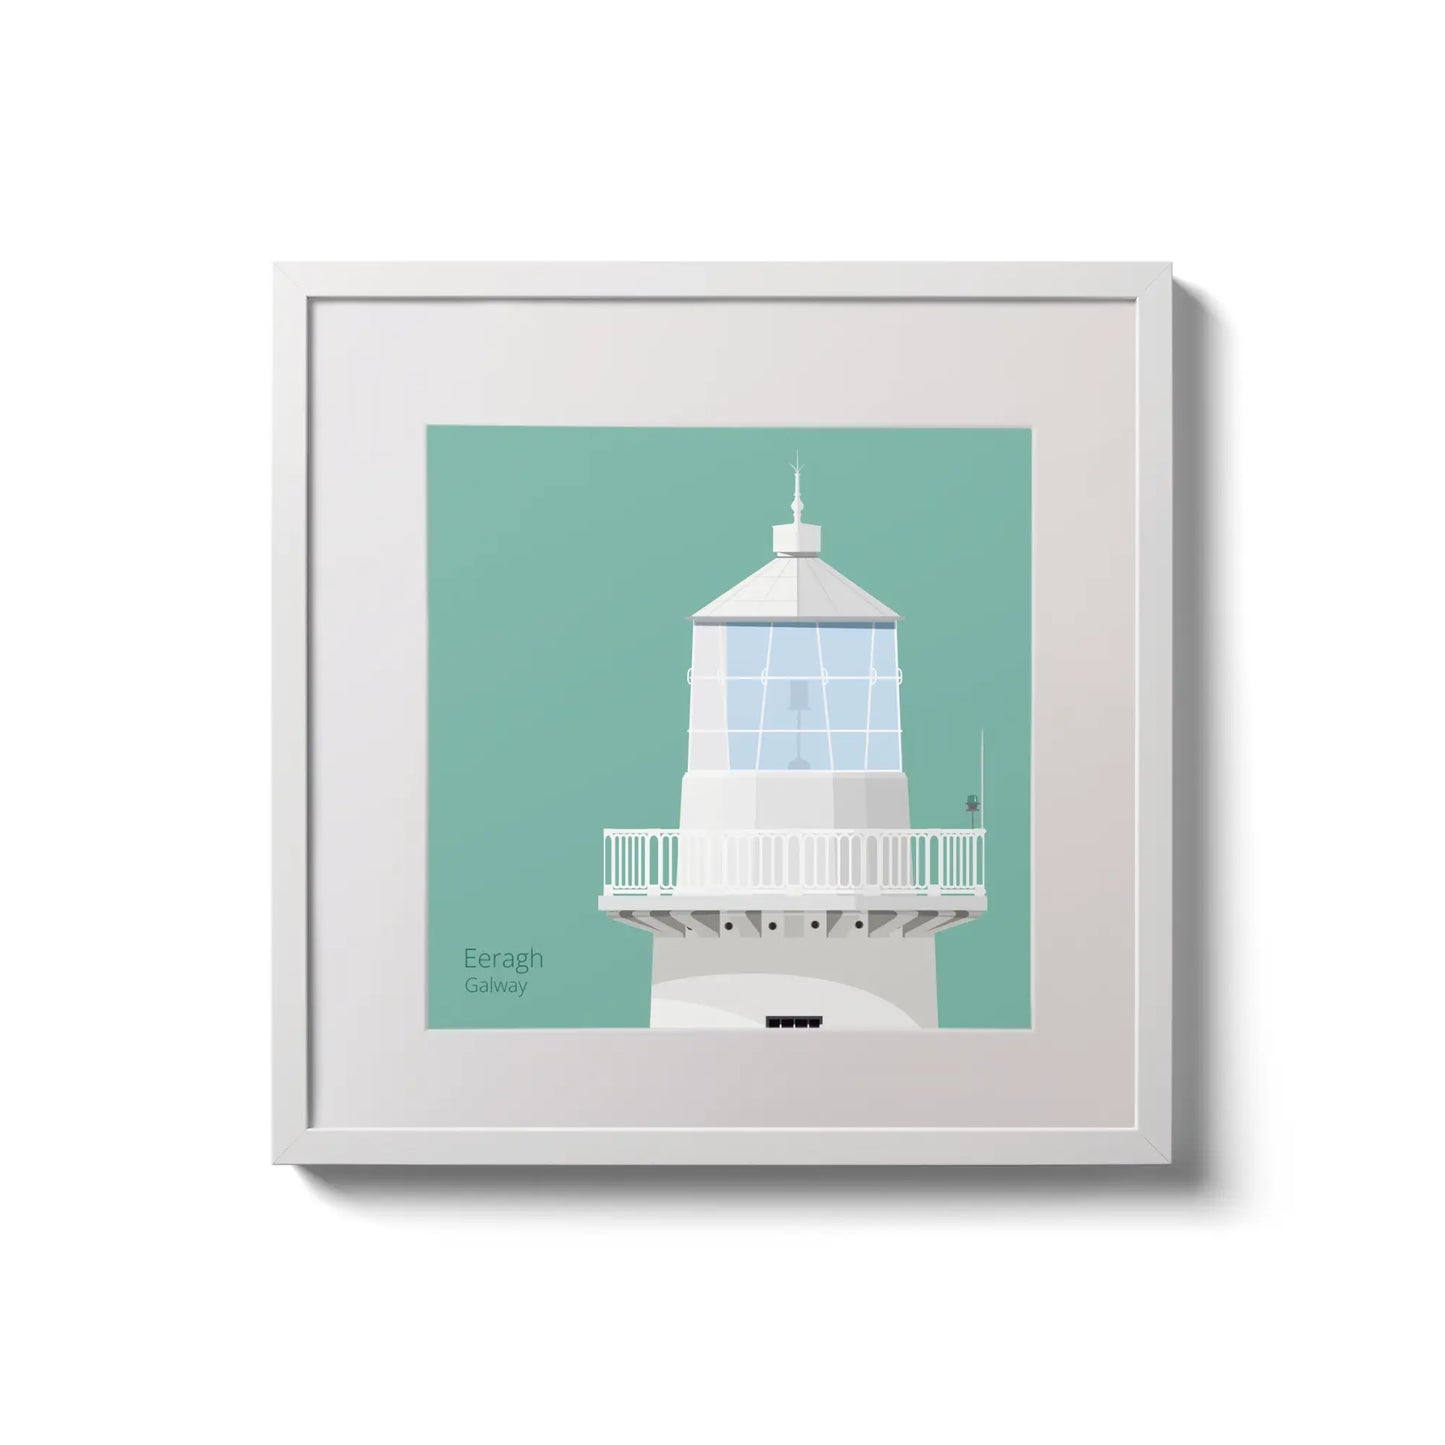 Contemporary wall hanging Eeragh lighthouse on an ocean green background,  in a white square frame measuring 20x20cm.